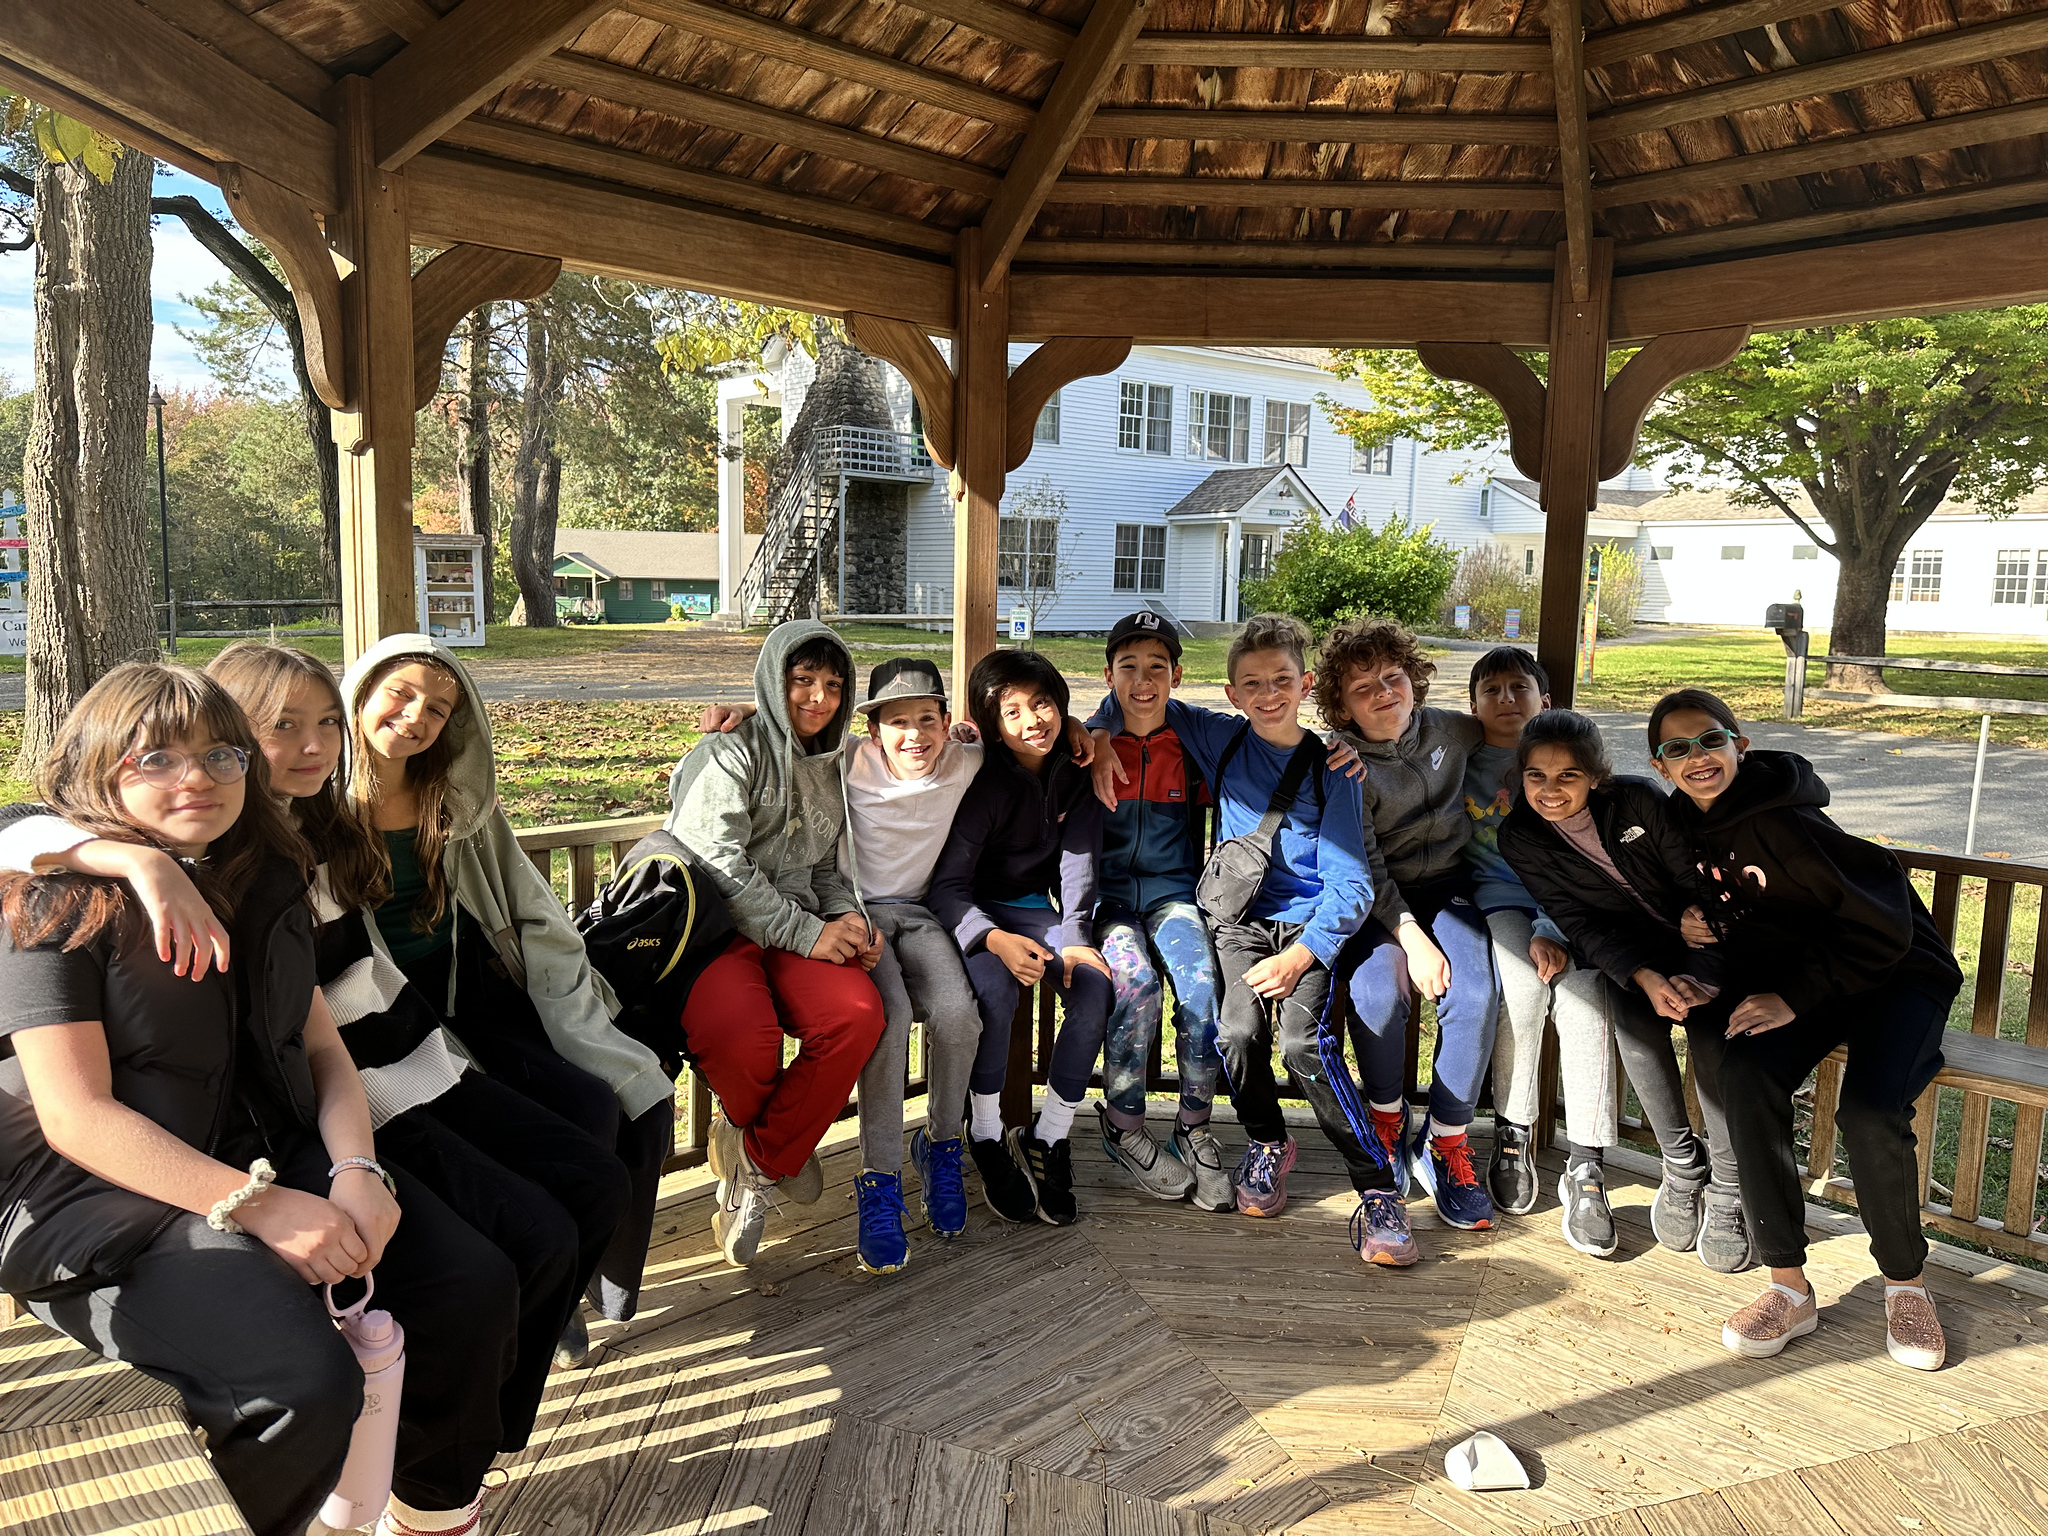 ECFS 5th Grade students smile together while sitting in a gazeebo.